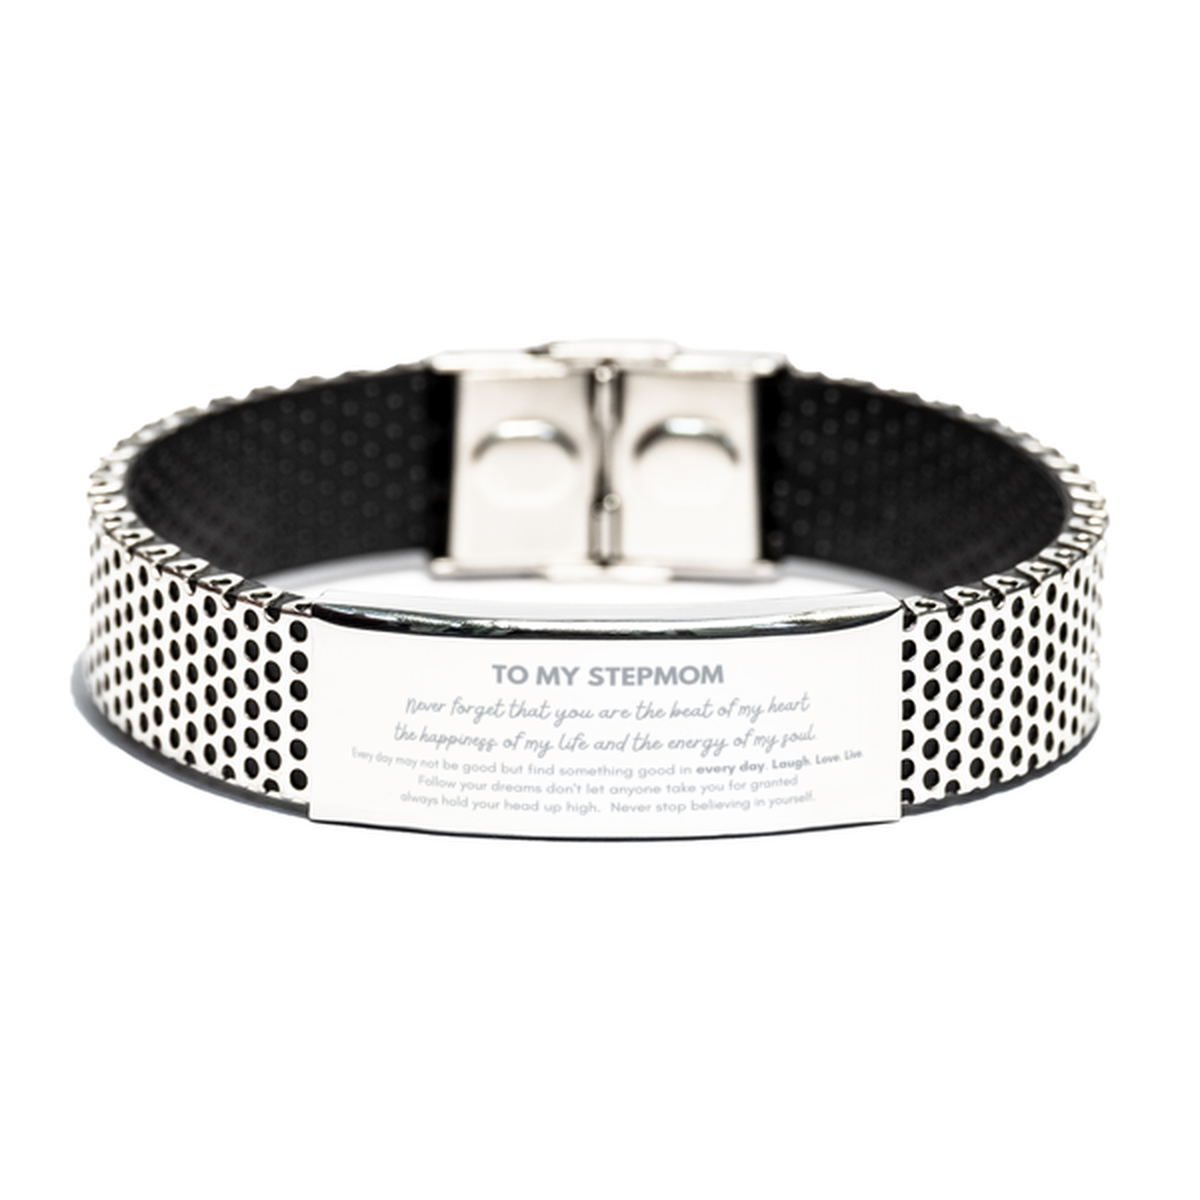 To My Stepmom Bracelet Gifts, Christmas Stepmom Stainless Steel Bracelet Present, Birthday Unique Motivational For Stepmom, To My Stepmom Never forget that you are the beat of my heart the happiness of my life and the energy of my soul